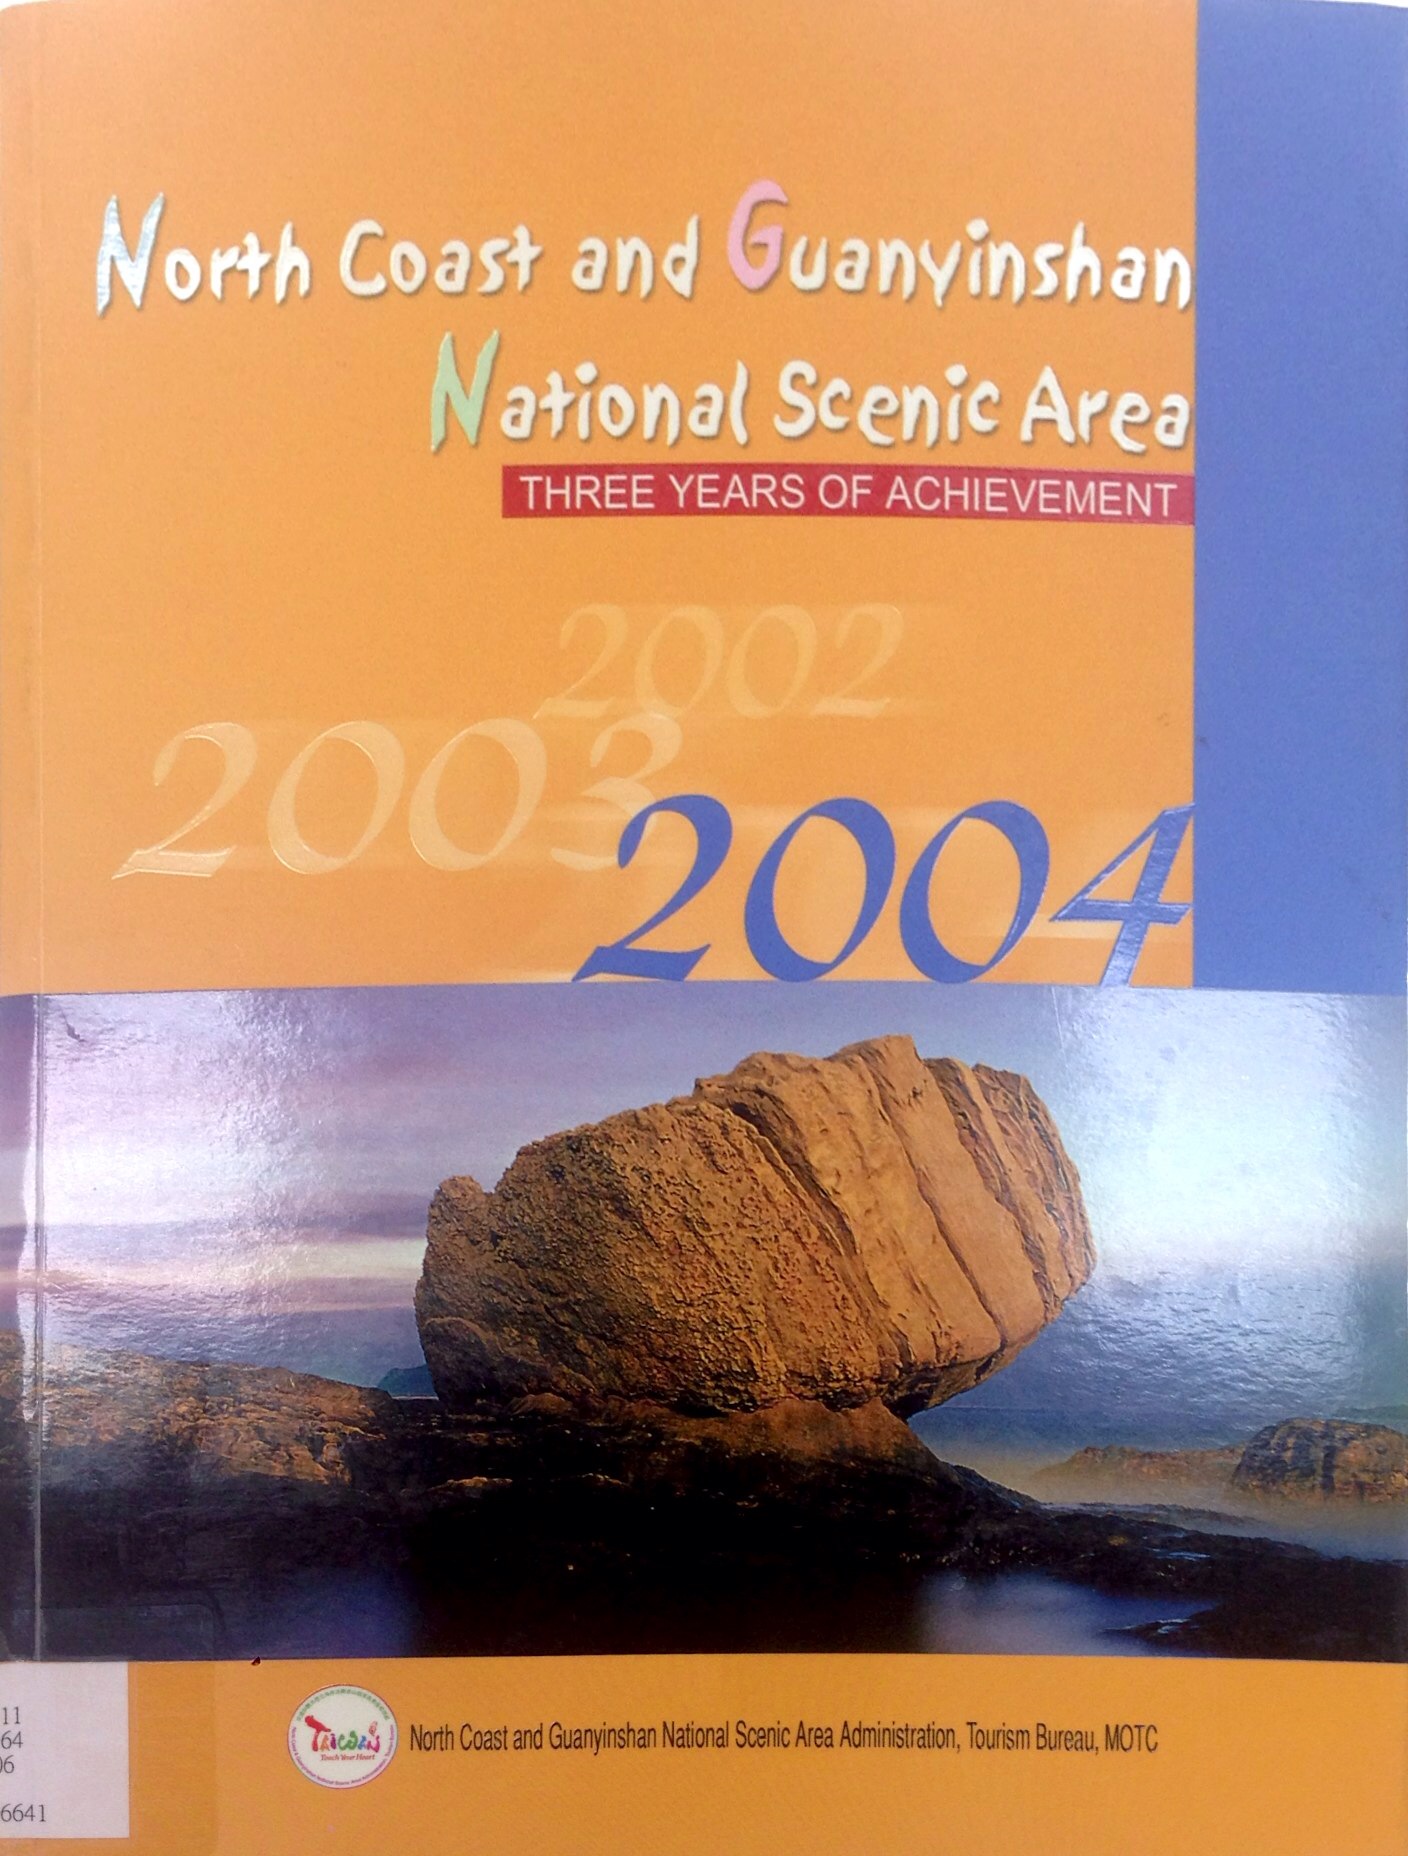 North coast and guanyinshan national scenic area three years of achievement